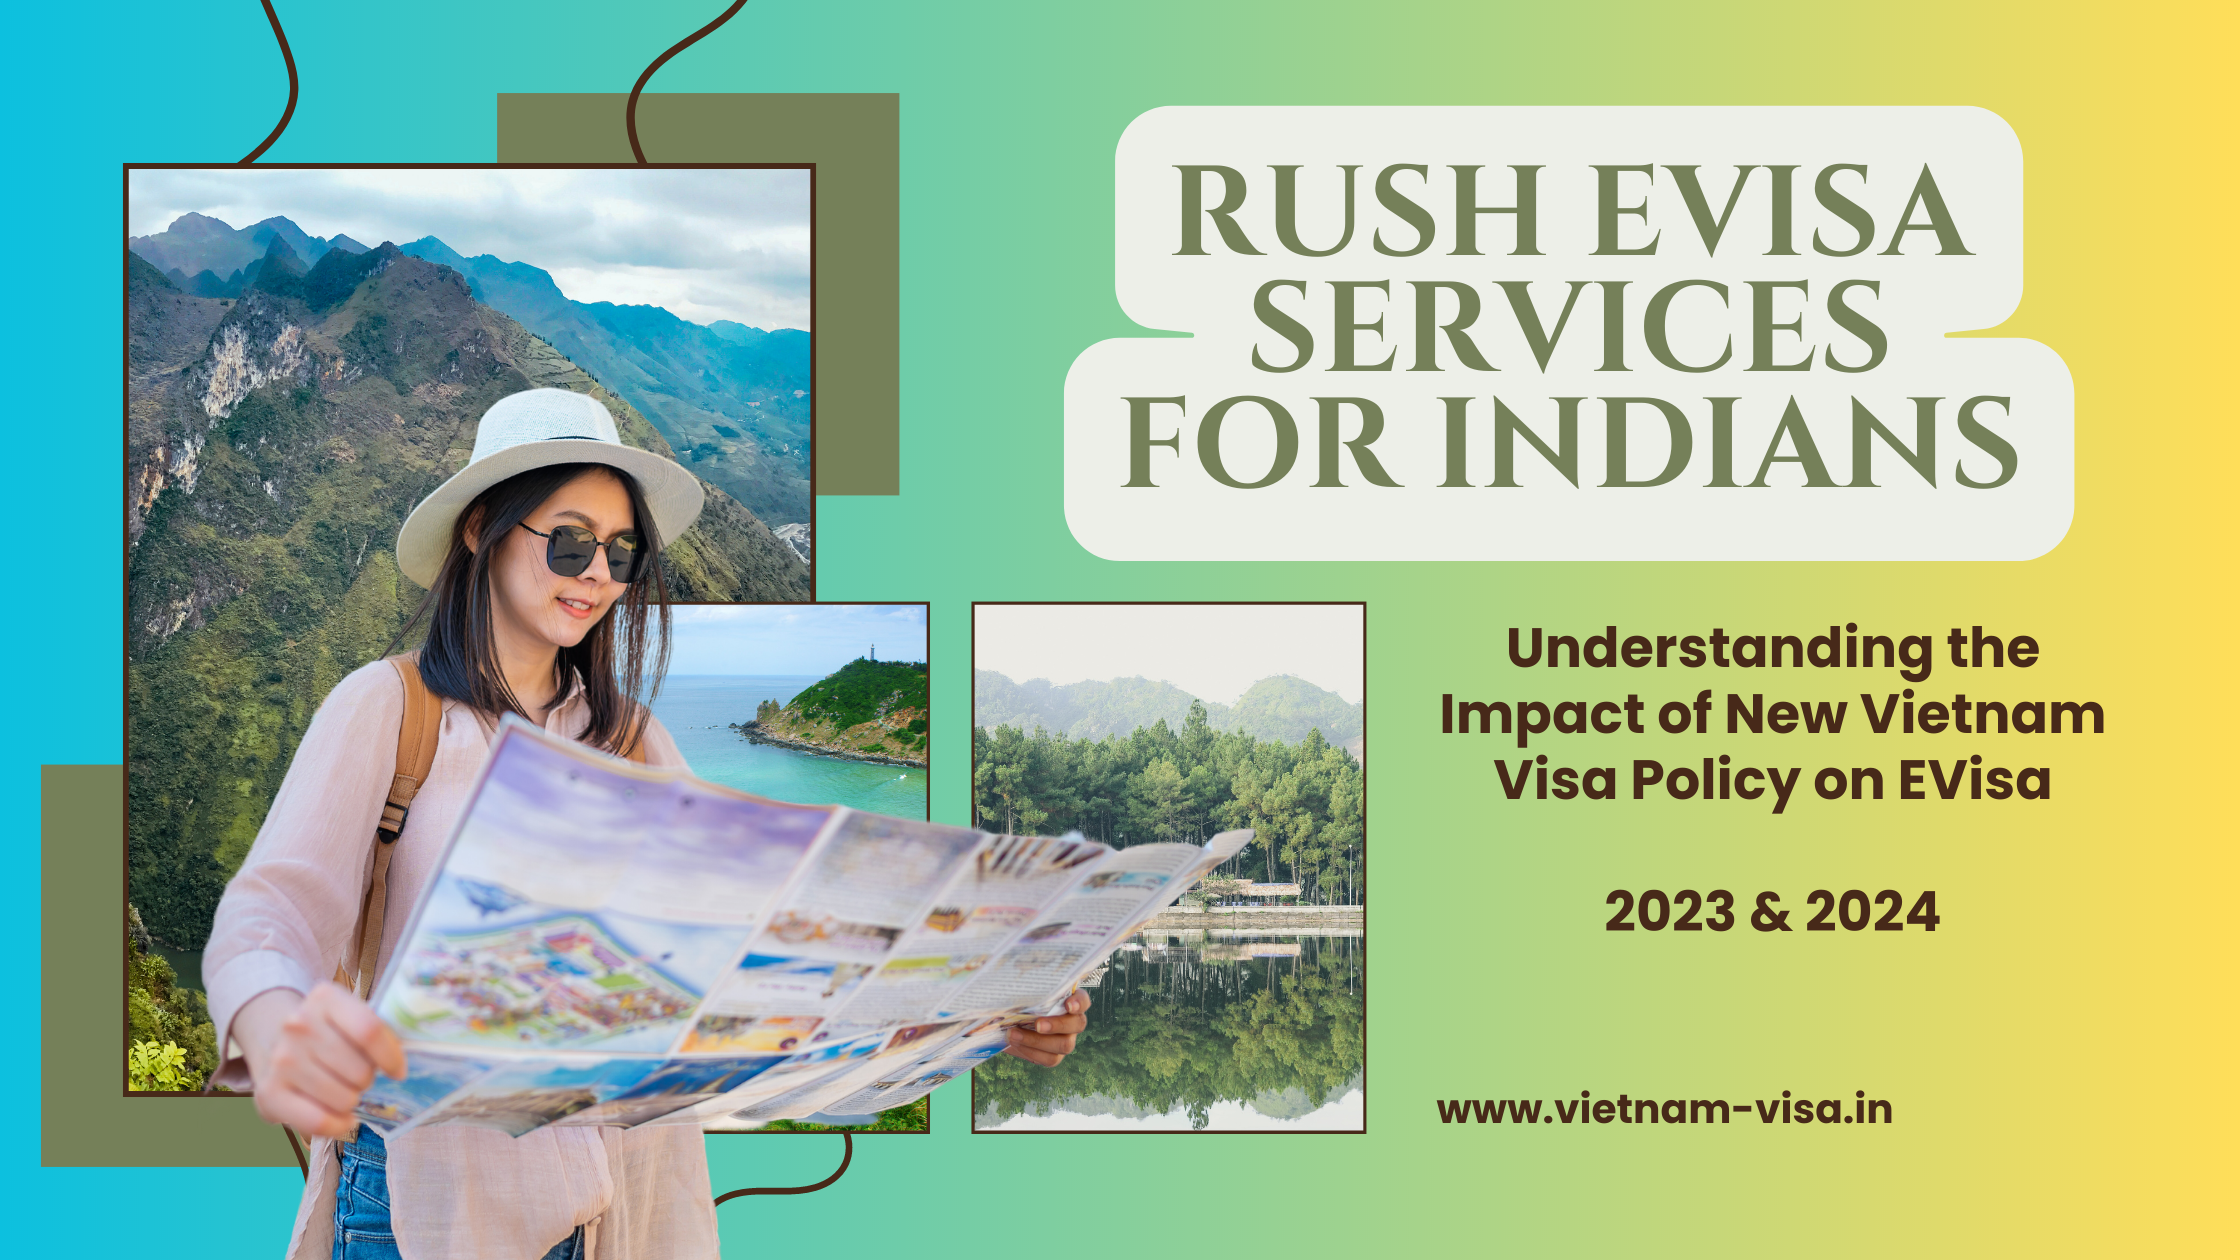 Rush-Evisa-Services-for-Indian-nationals-2023-2024